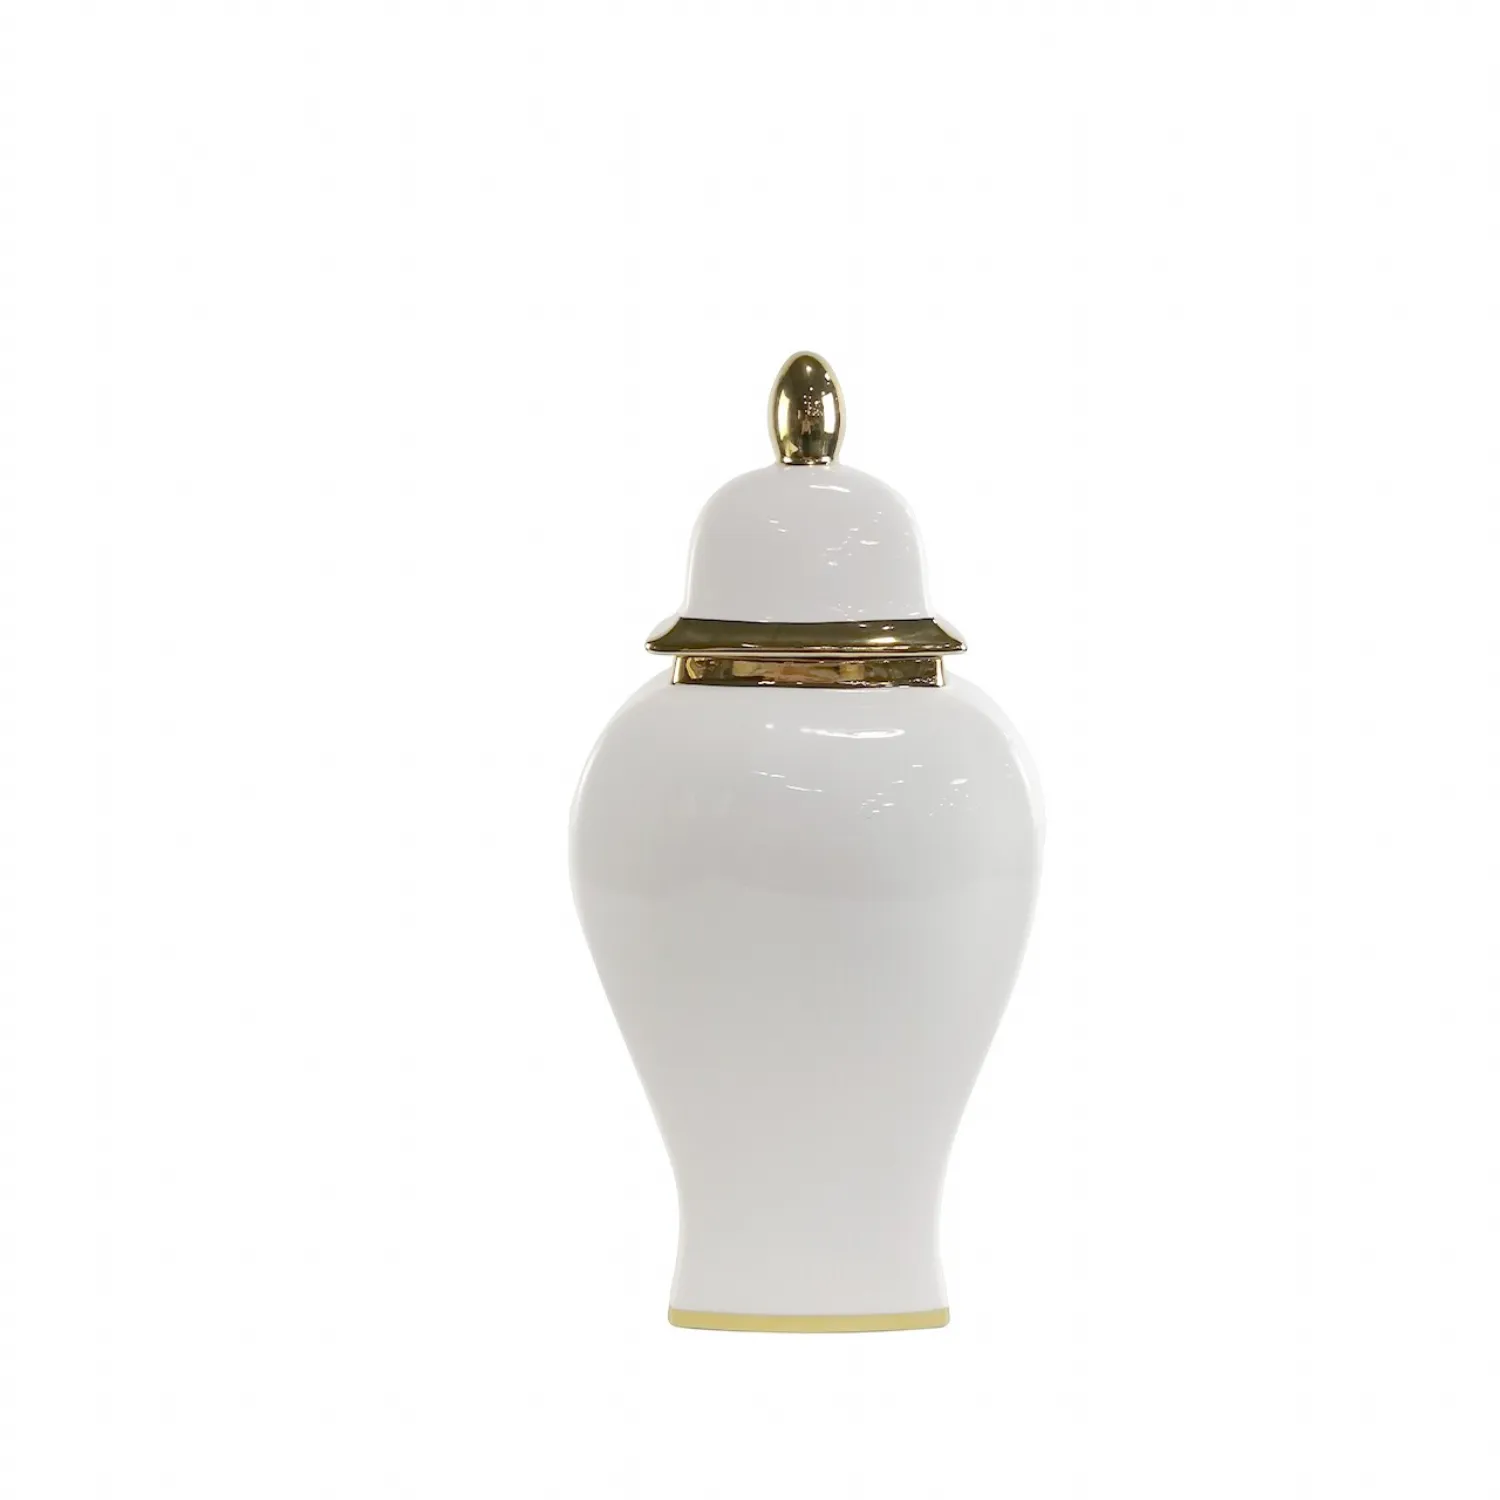 42. 6cm White With Gold Lid Ginger Jar